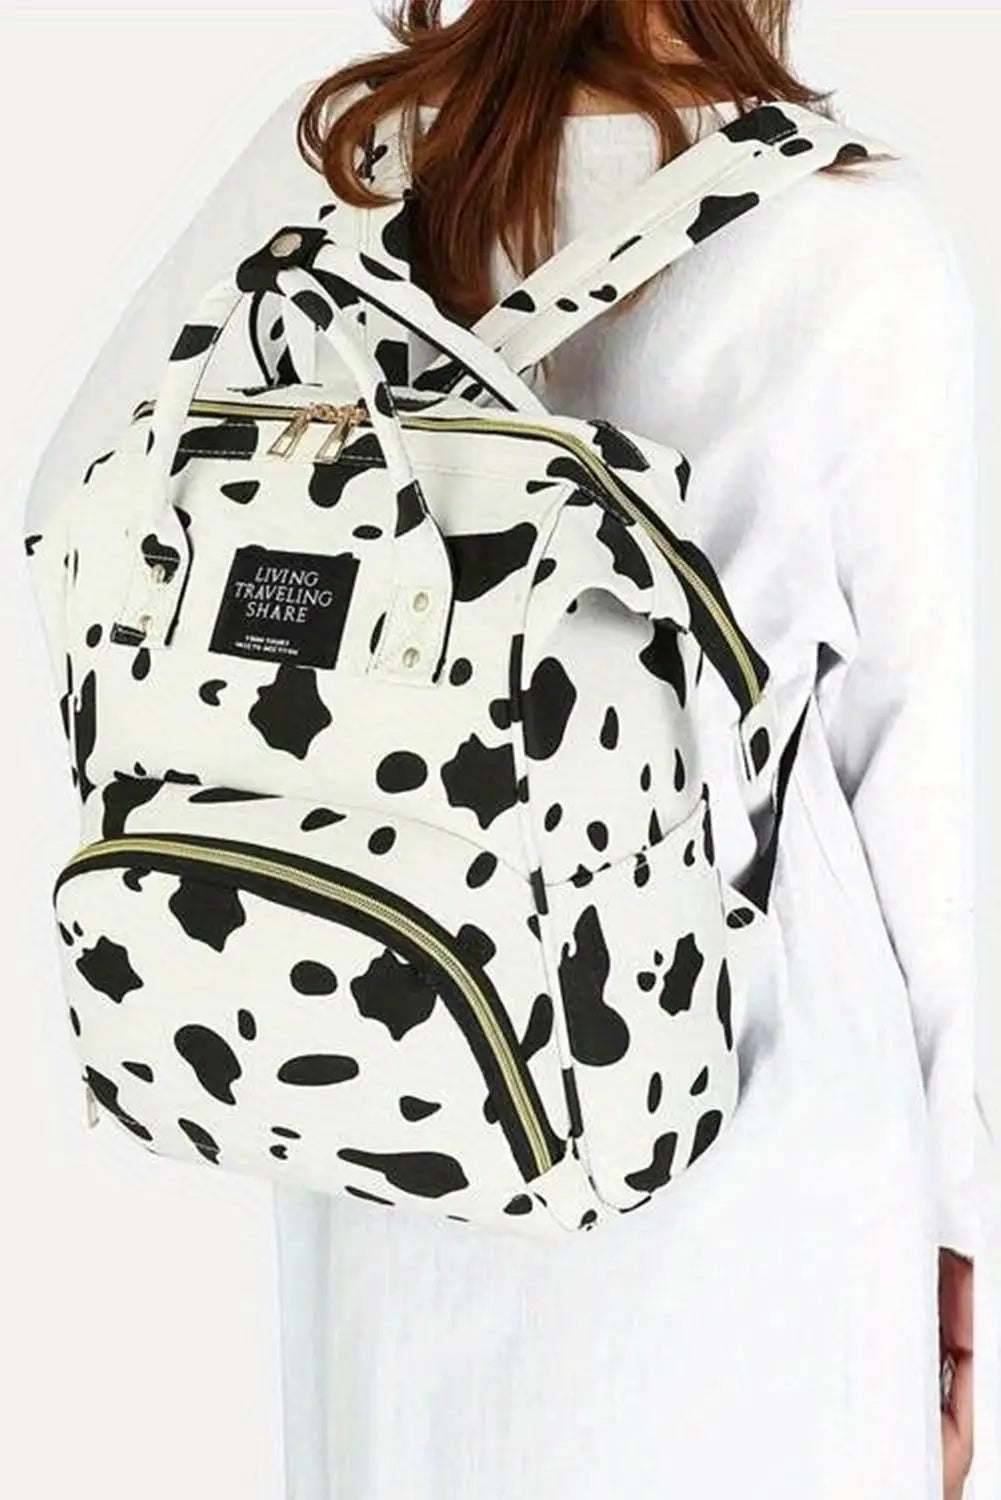 Bright white cow spot print multi pocket canvas backpack - one size / 100% polyester - backpacks